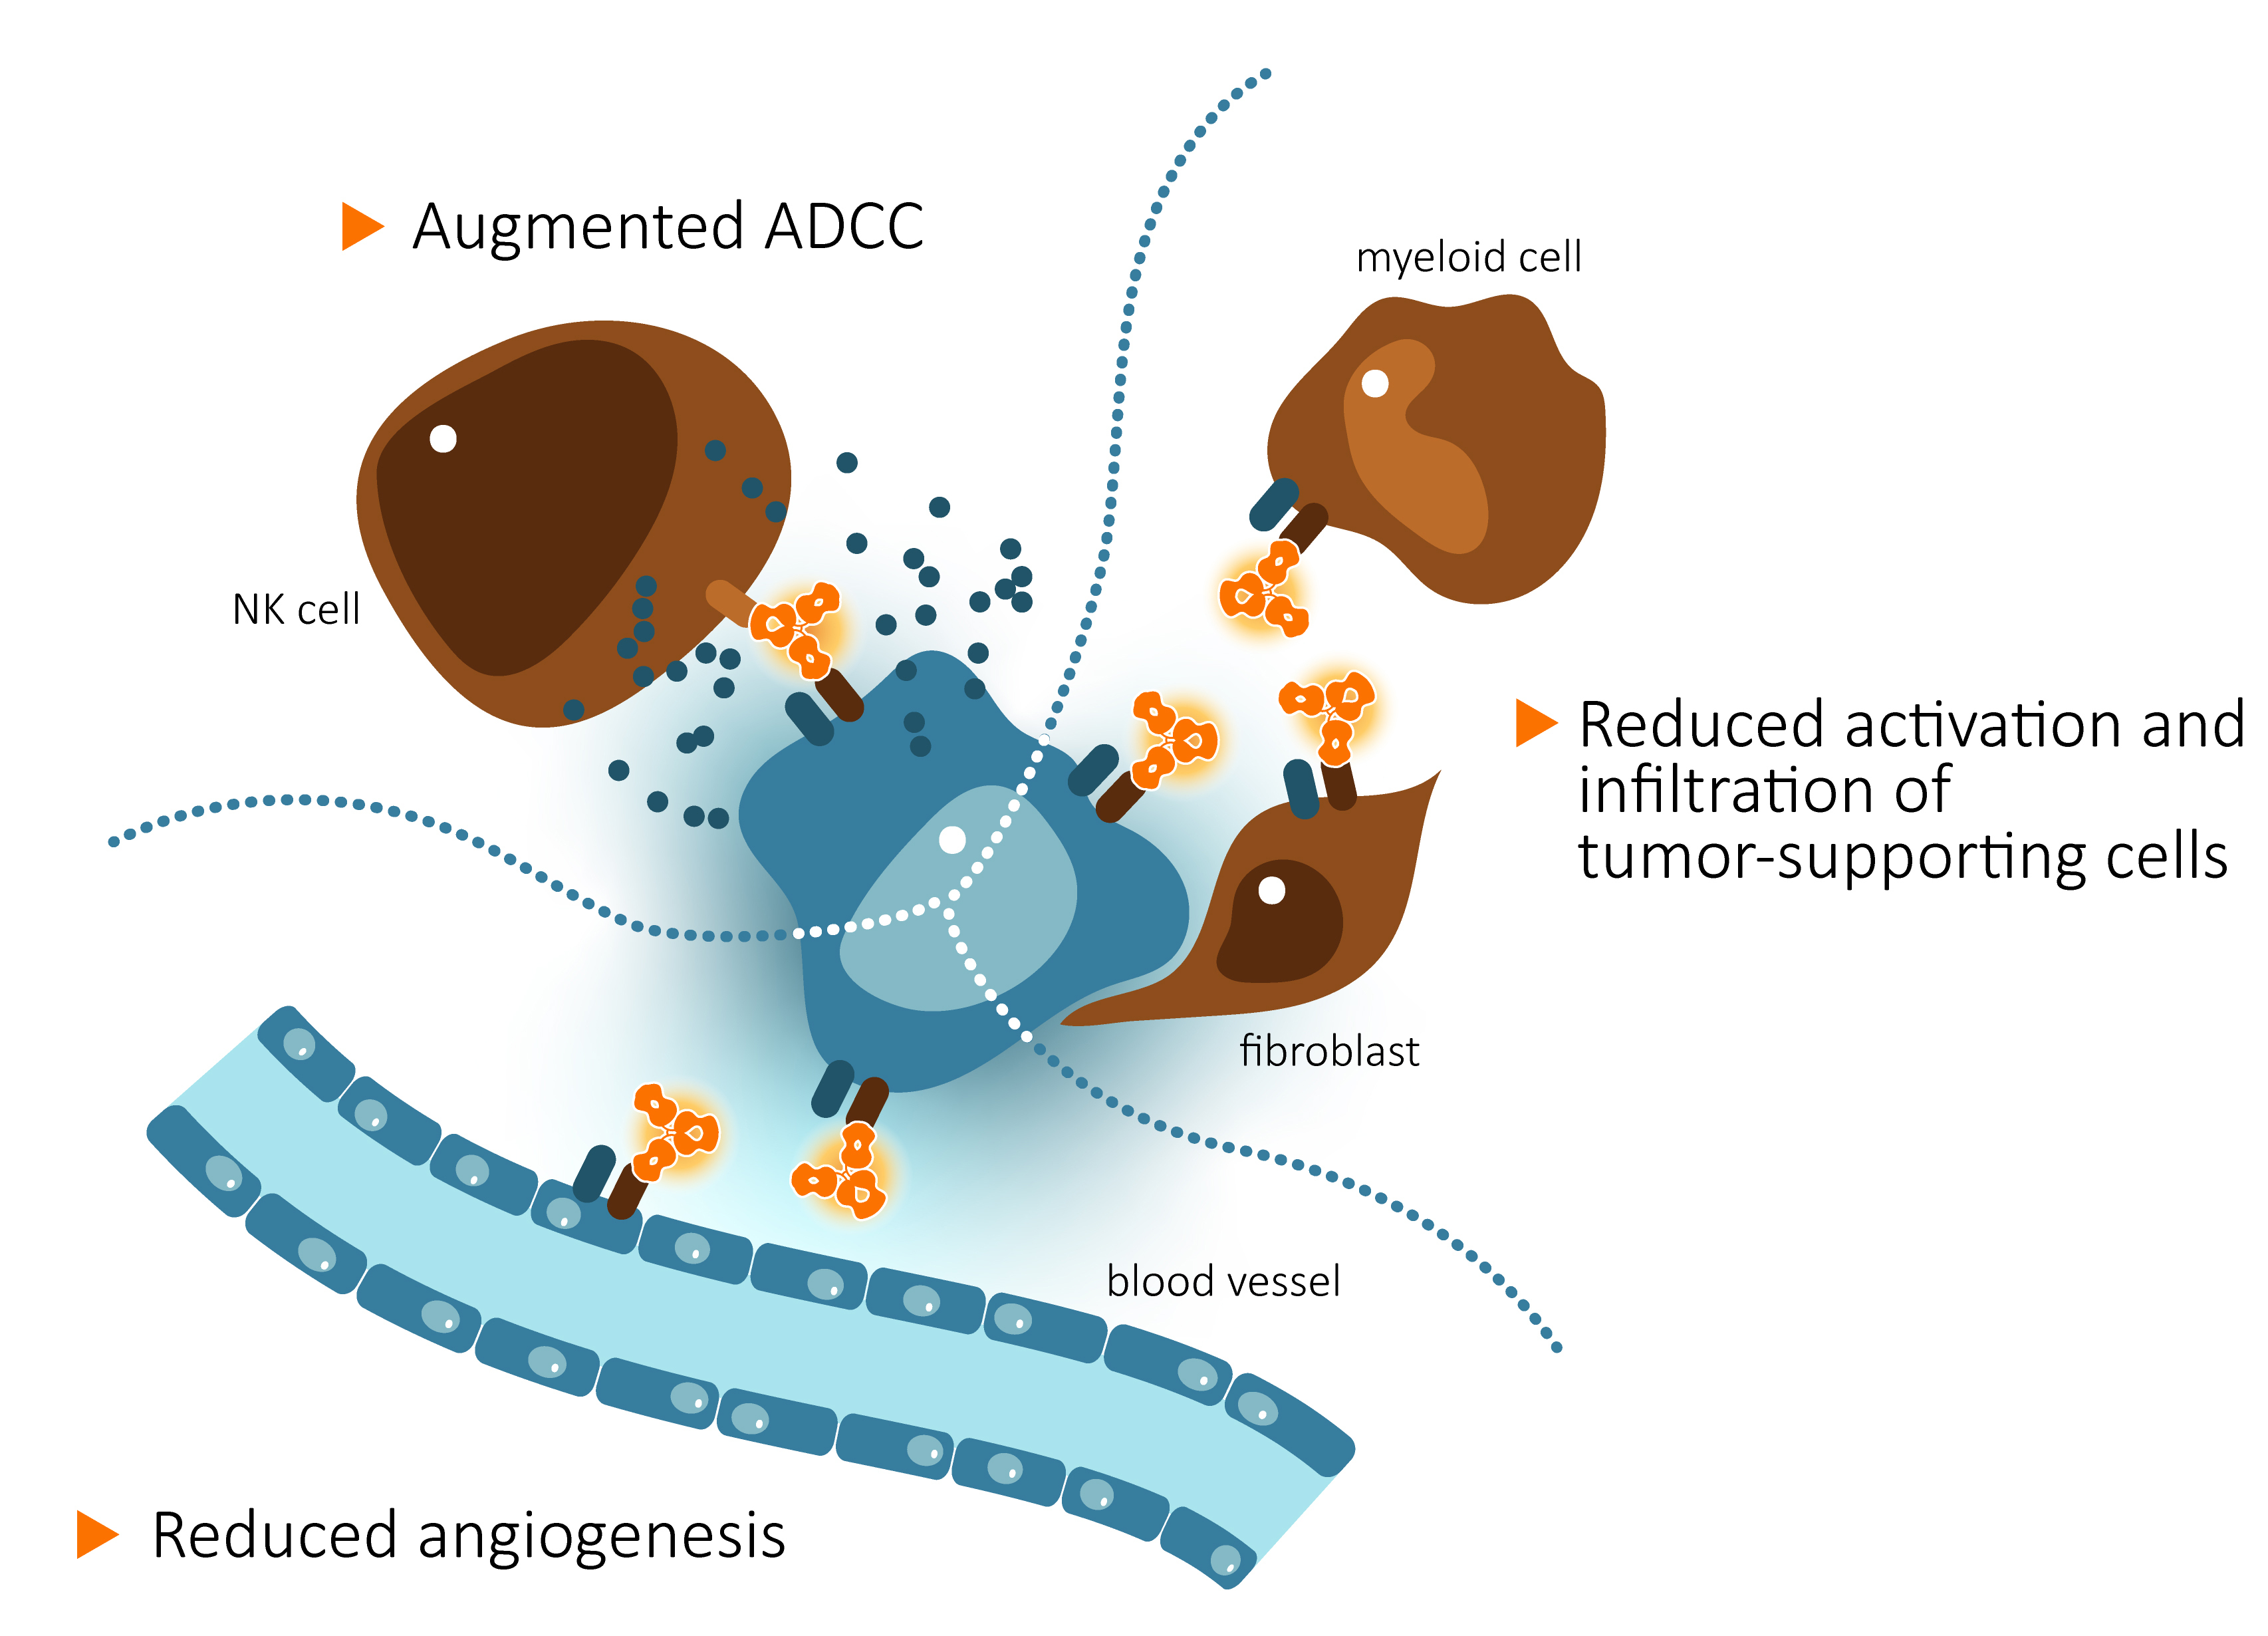 CAN04 counteracts tumor growth by several mechanisms; CAN04 induces tumor cell killing by NK cells via ADCC and reduces infiltration of tumor-supporting cells and blood vessel formation by blockade of IL-1 alpha and IL-1 beta signaling via IL1RAP.